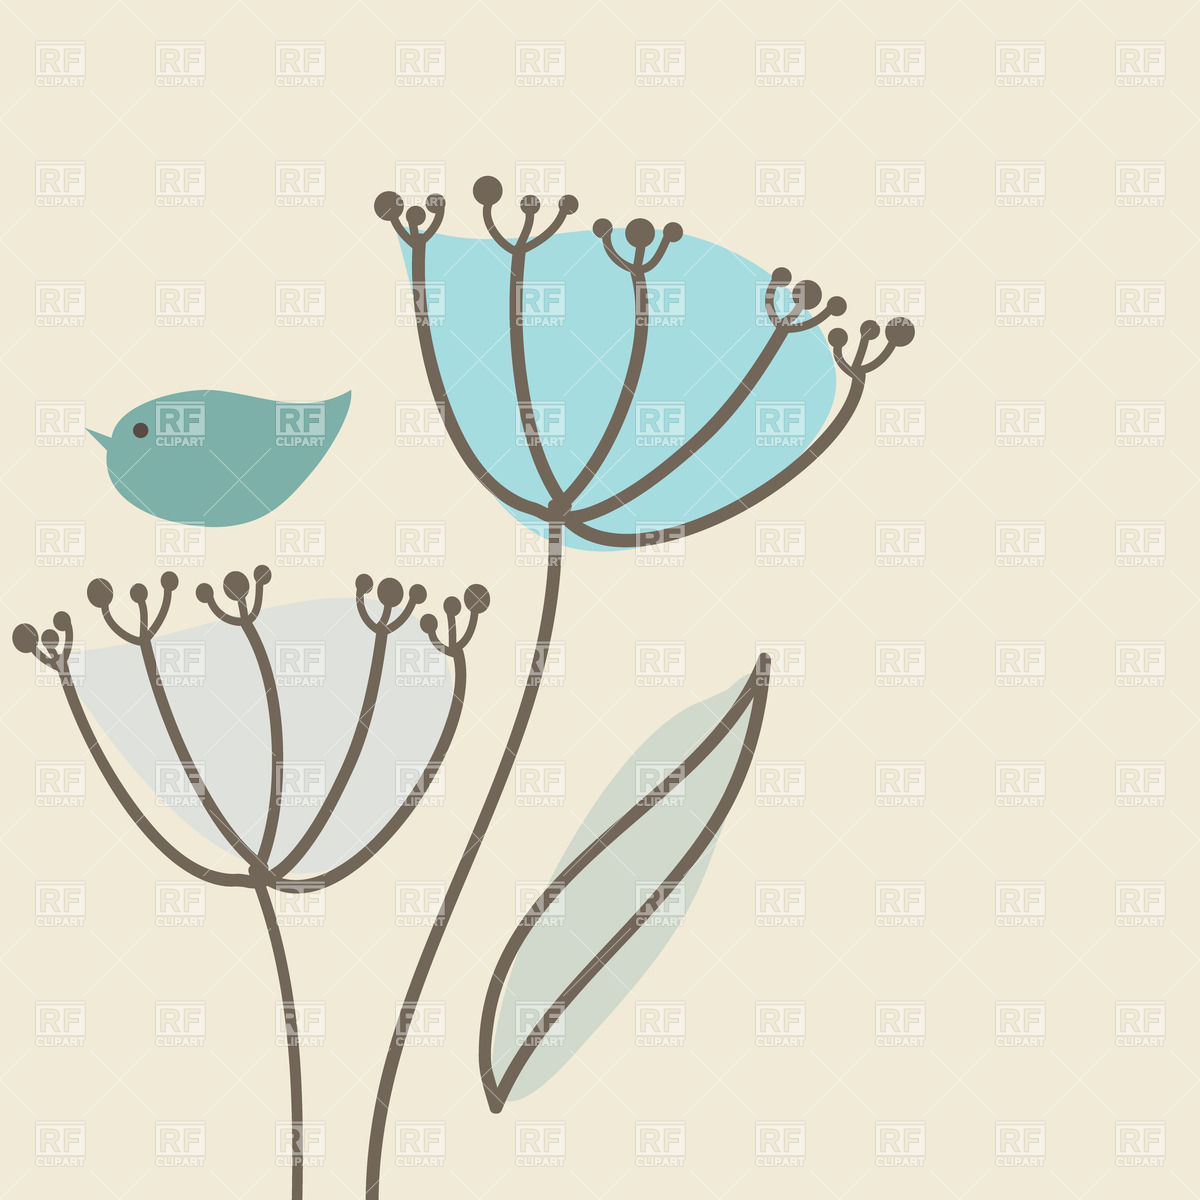 Funny Hand Drawn Flowers And Bird 24279 Download Royalty Free Vector